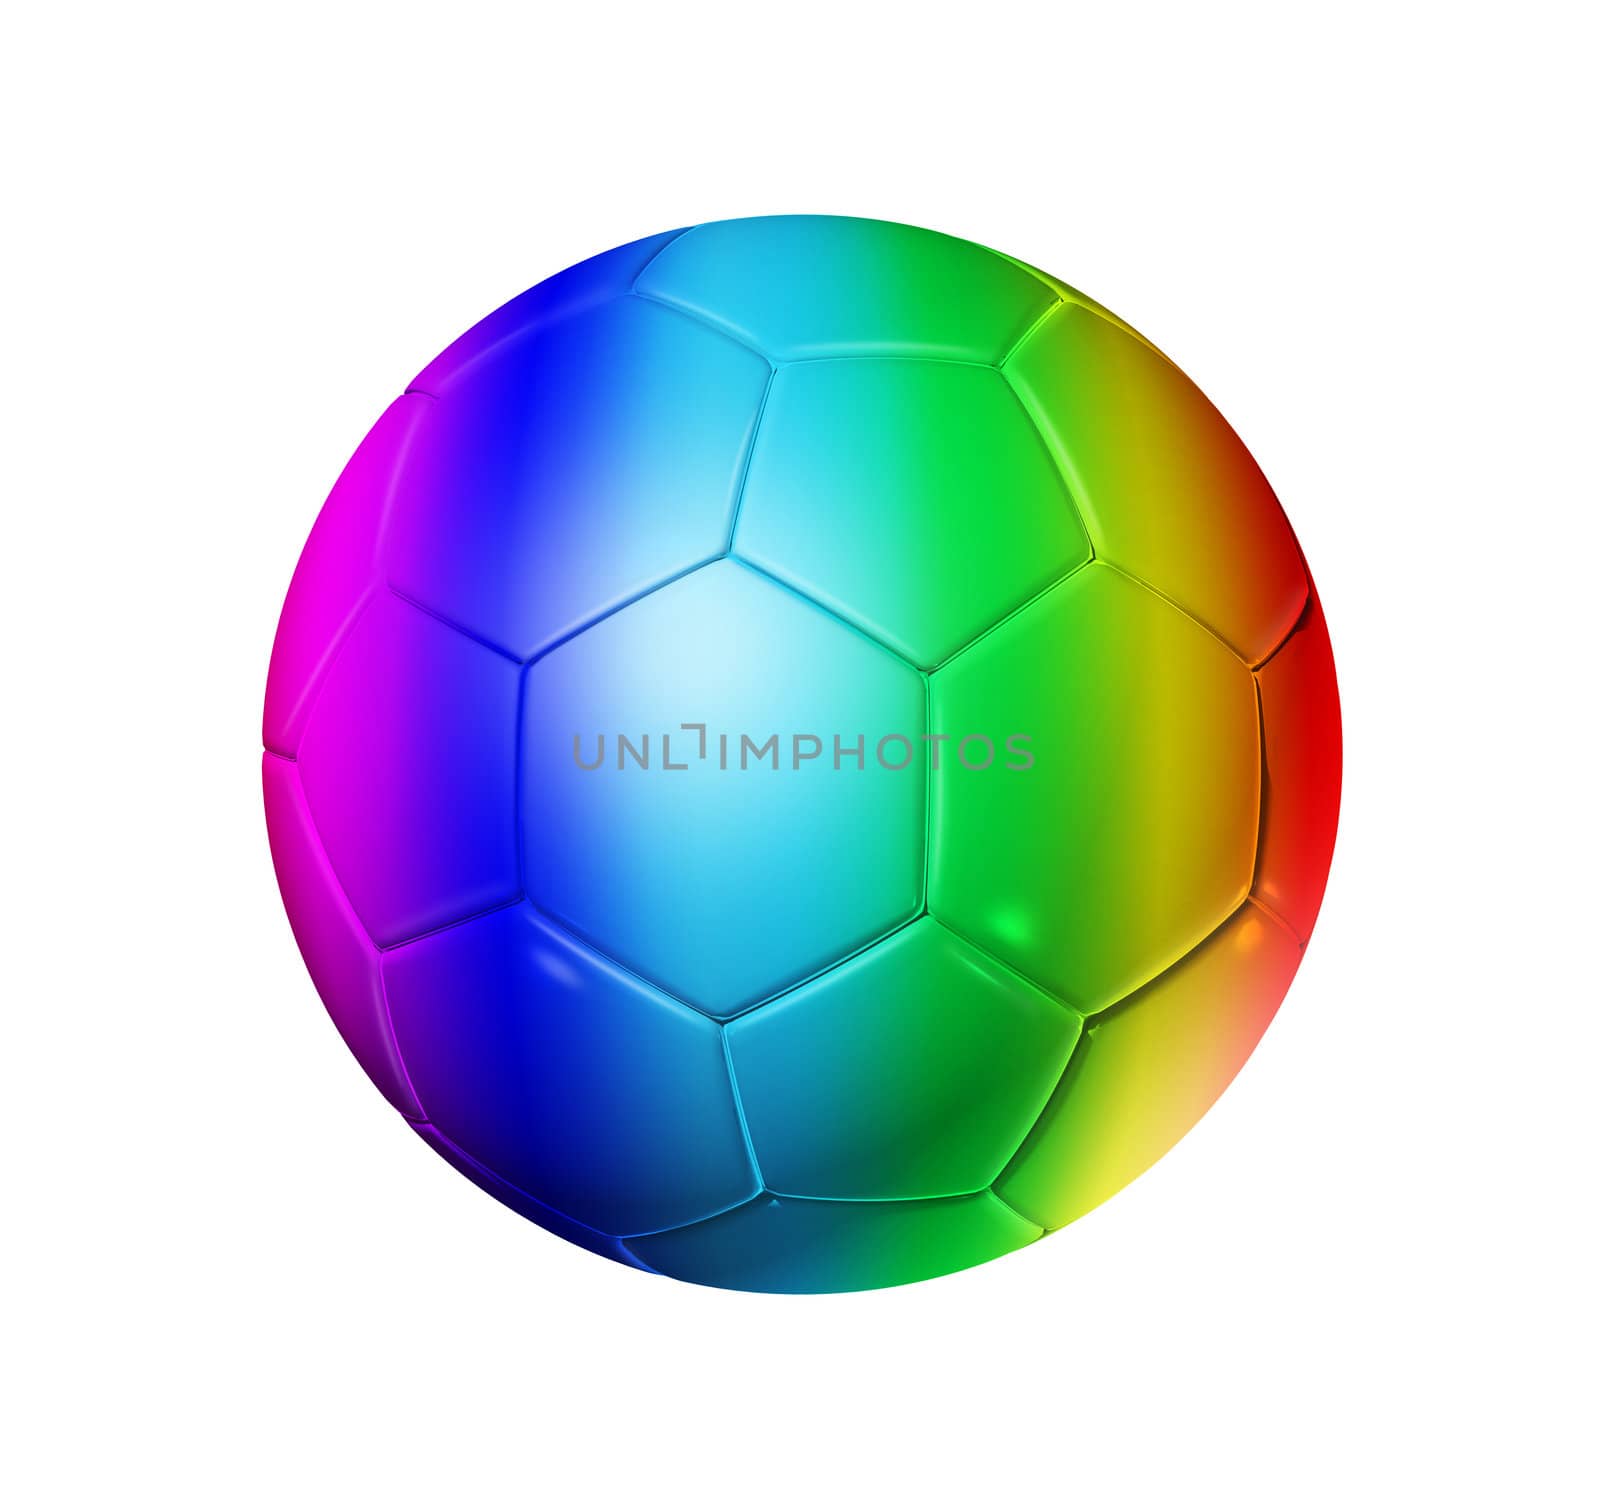 3D rainbow soccer ball isolated on white with clipping path